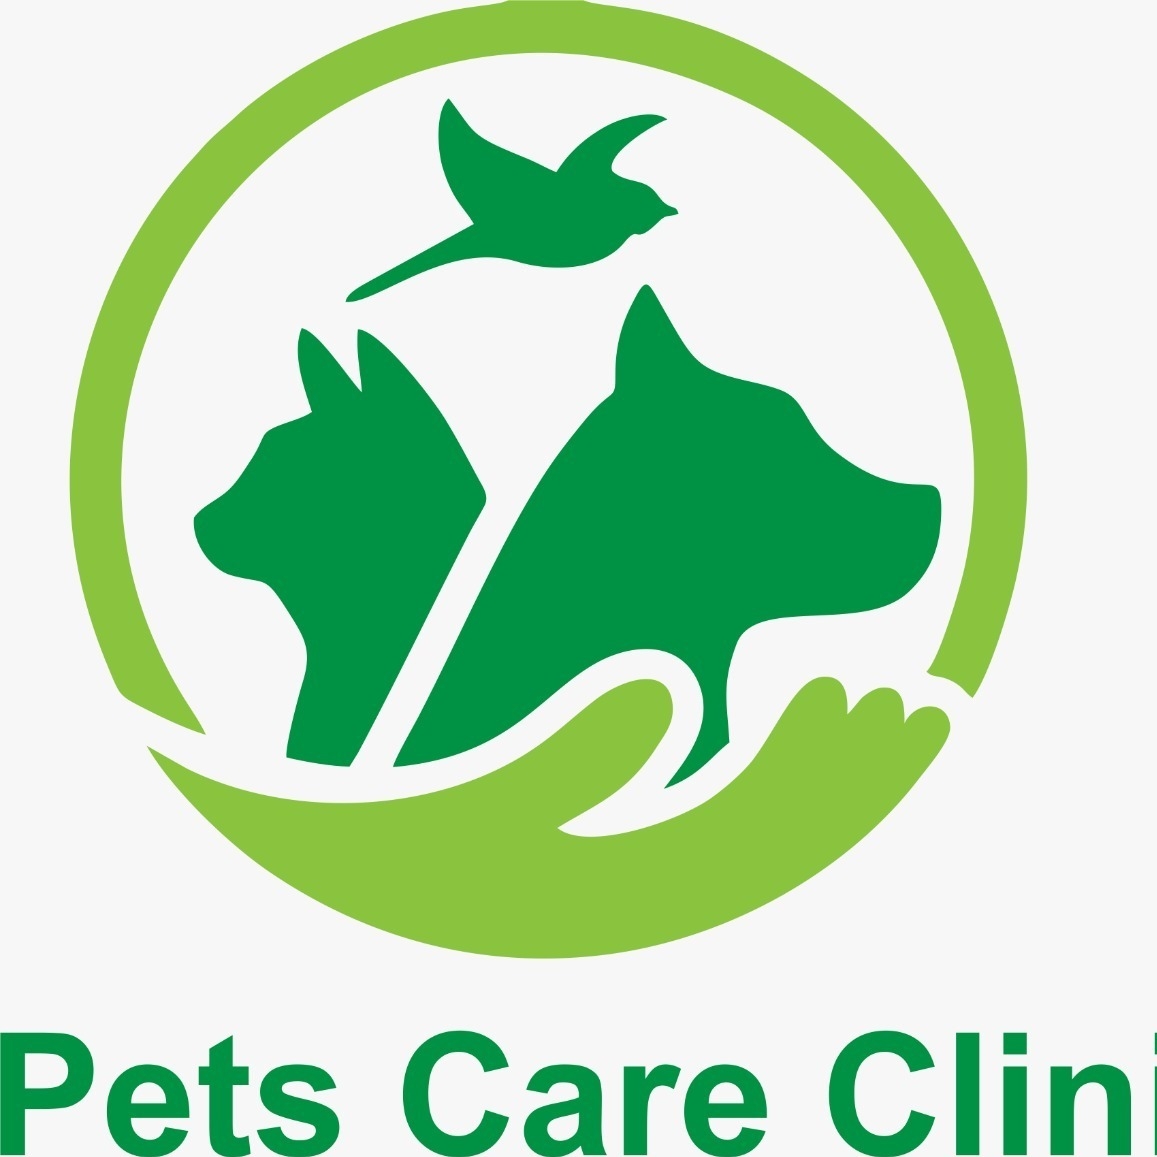 Pets Care Clinic|Dentists|Medical Services